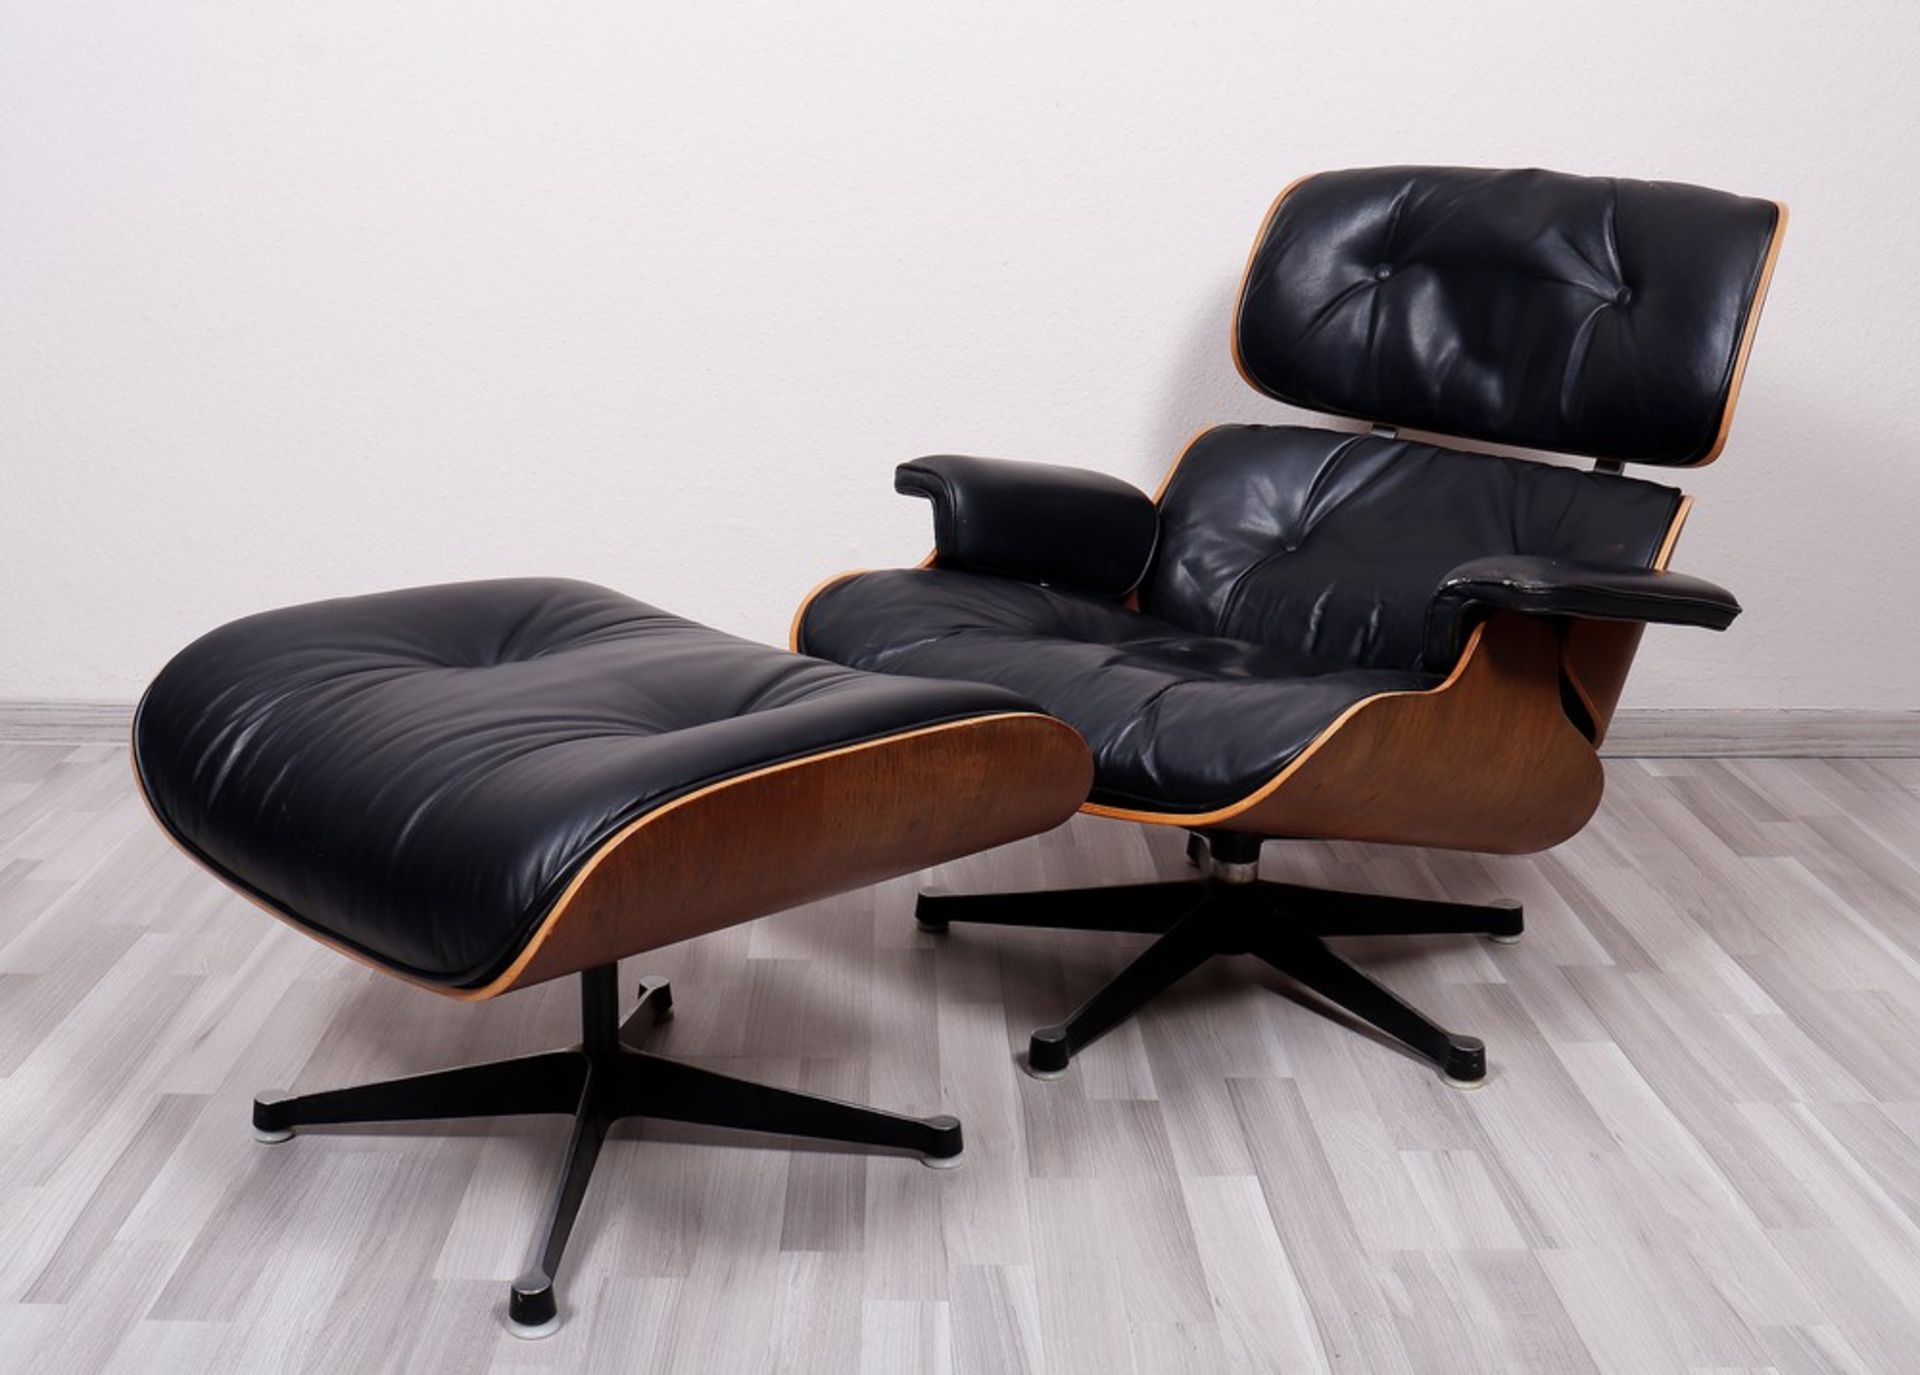 Lounge chair with ottoman, design Charles Eames for Herman Miller, manufactured by Fehlbaum (Herman